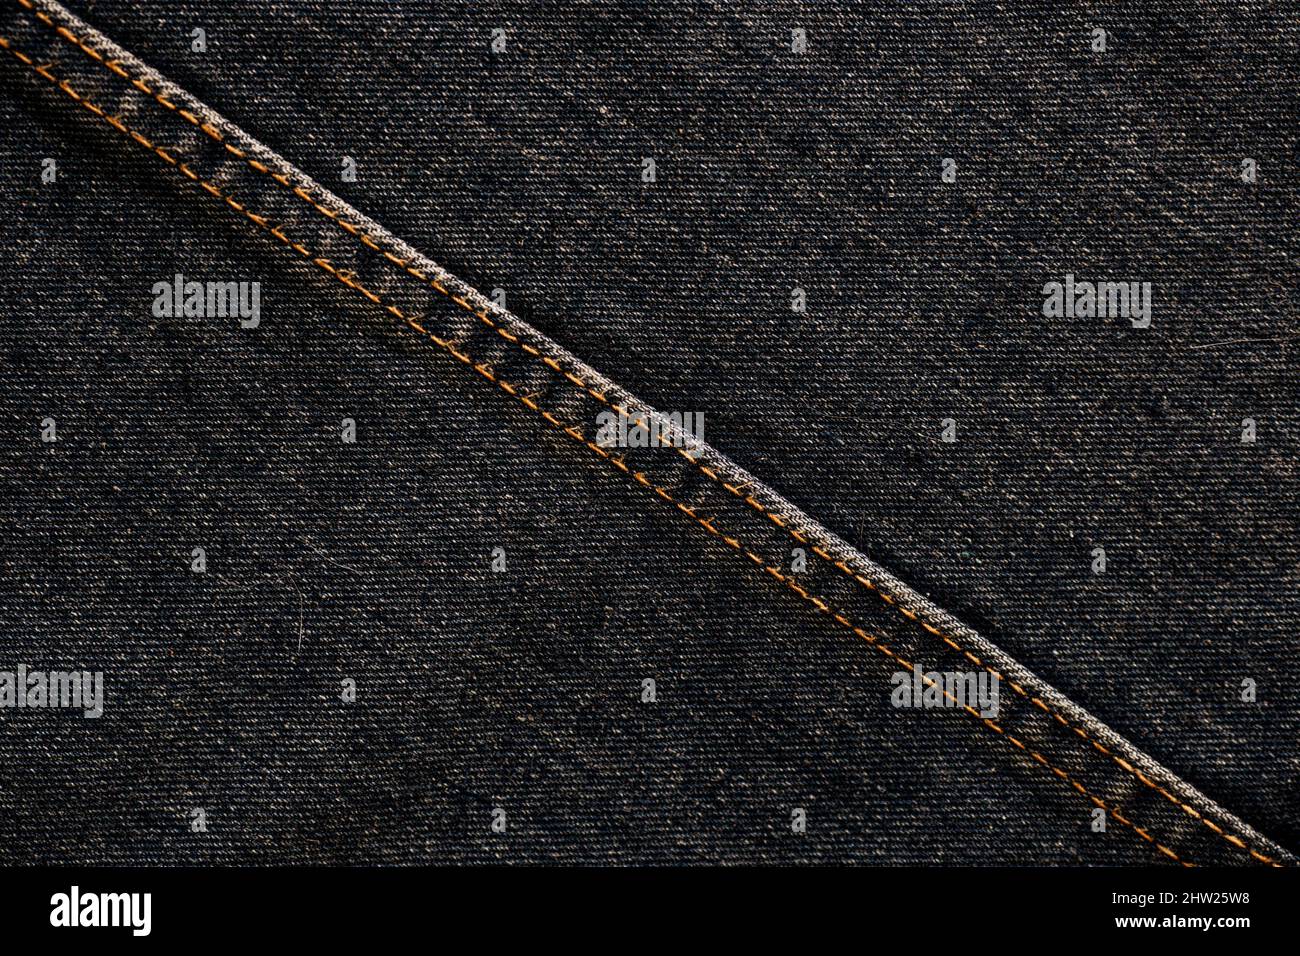 Fashionable denim with stitching. Textile material. Empty surface with space to copy. Part of clothes. View from above. Stock Photo